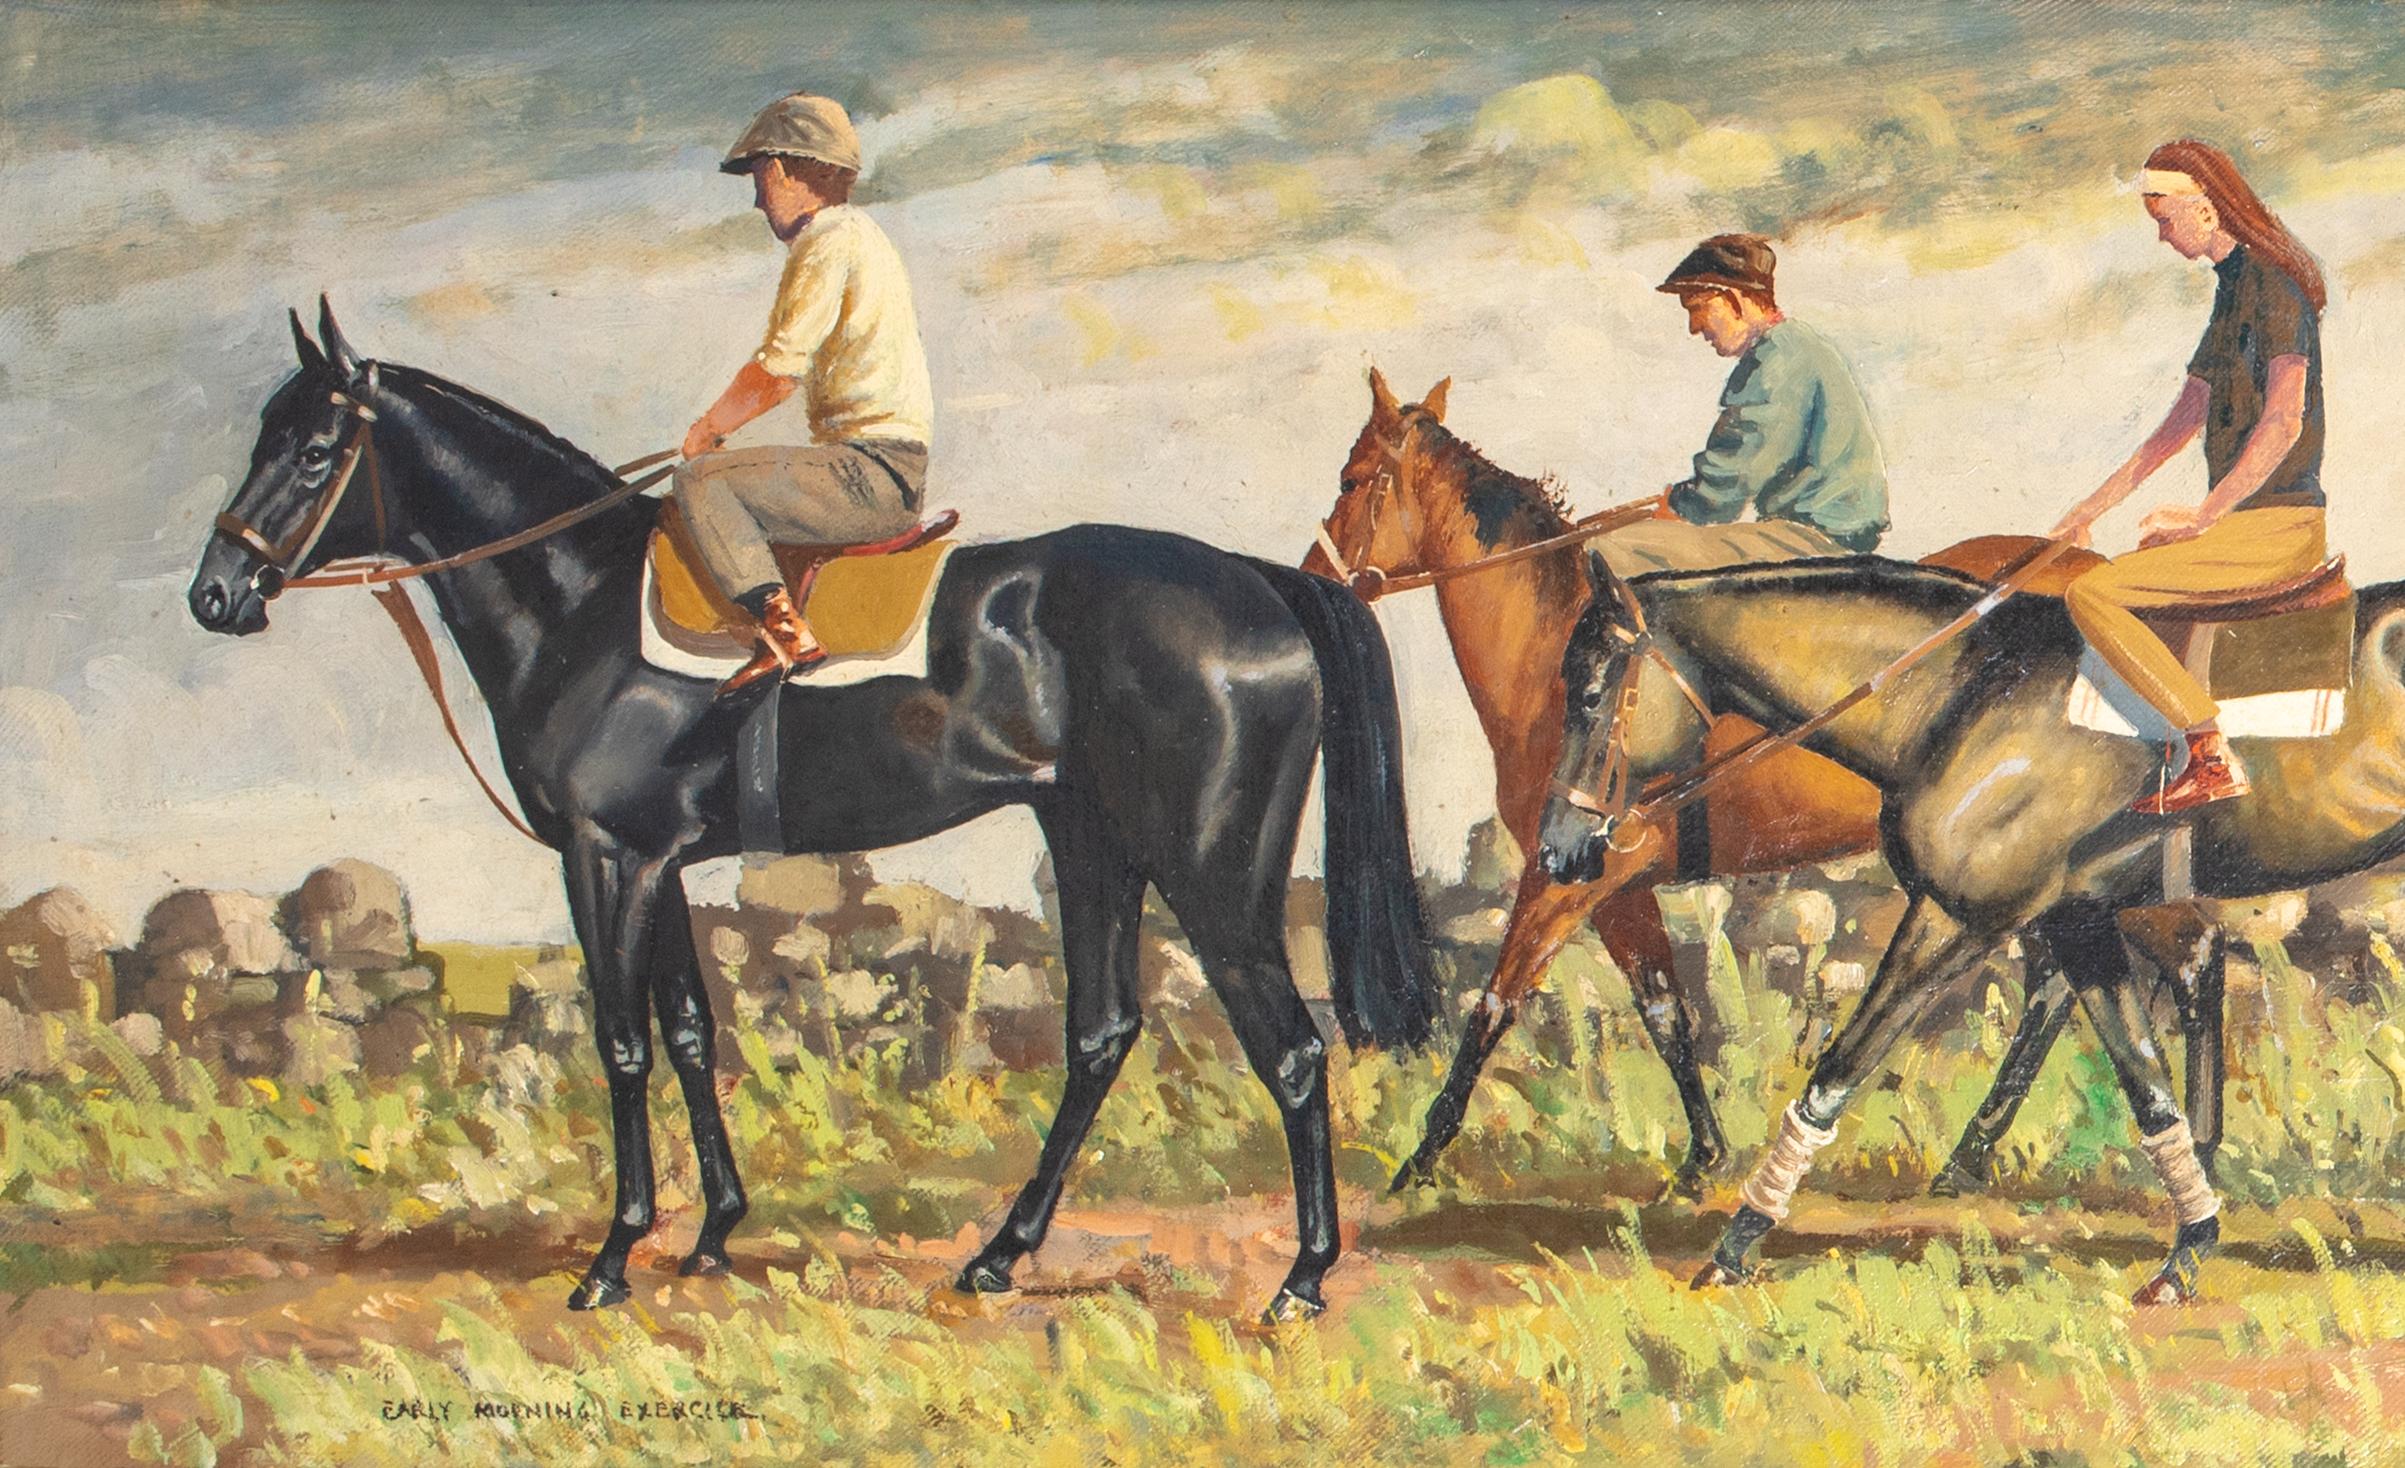 Morning Exercise, The Lumley Children, Jane, Richard & Friends, circa 1940's   For Sale 2